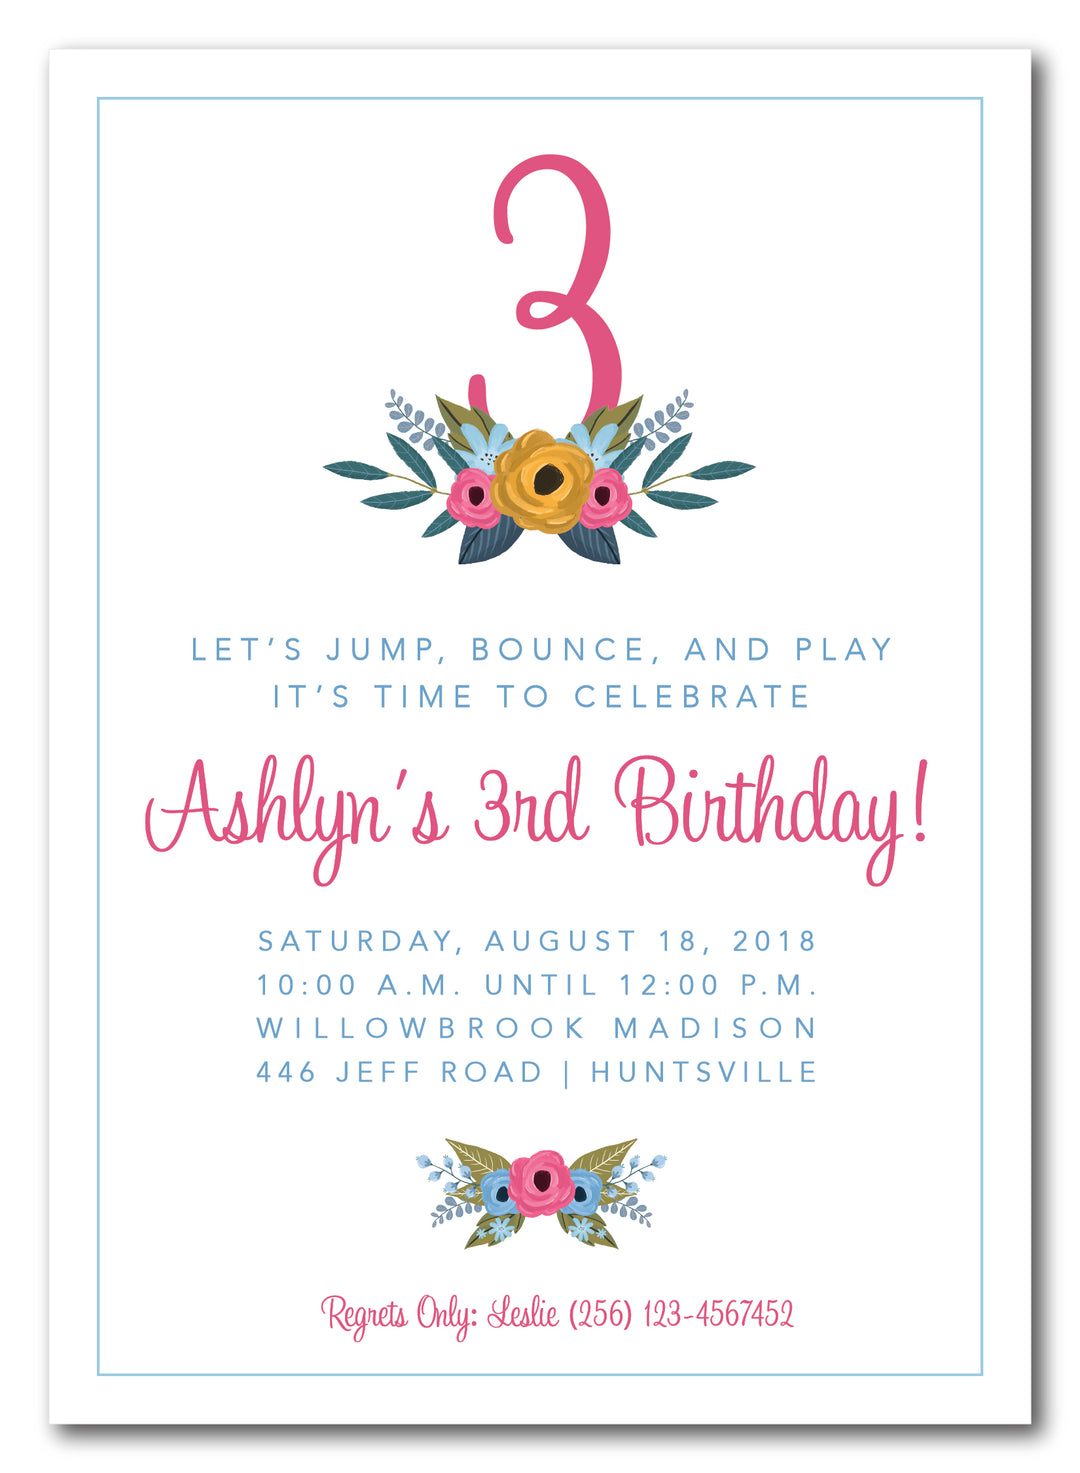 The Floral Number IV Birthday Party Invitation